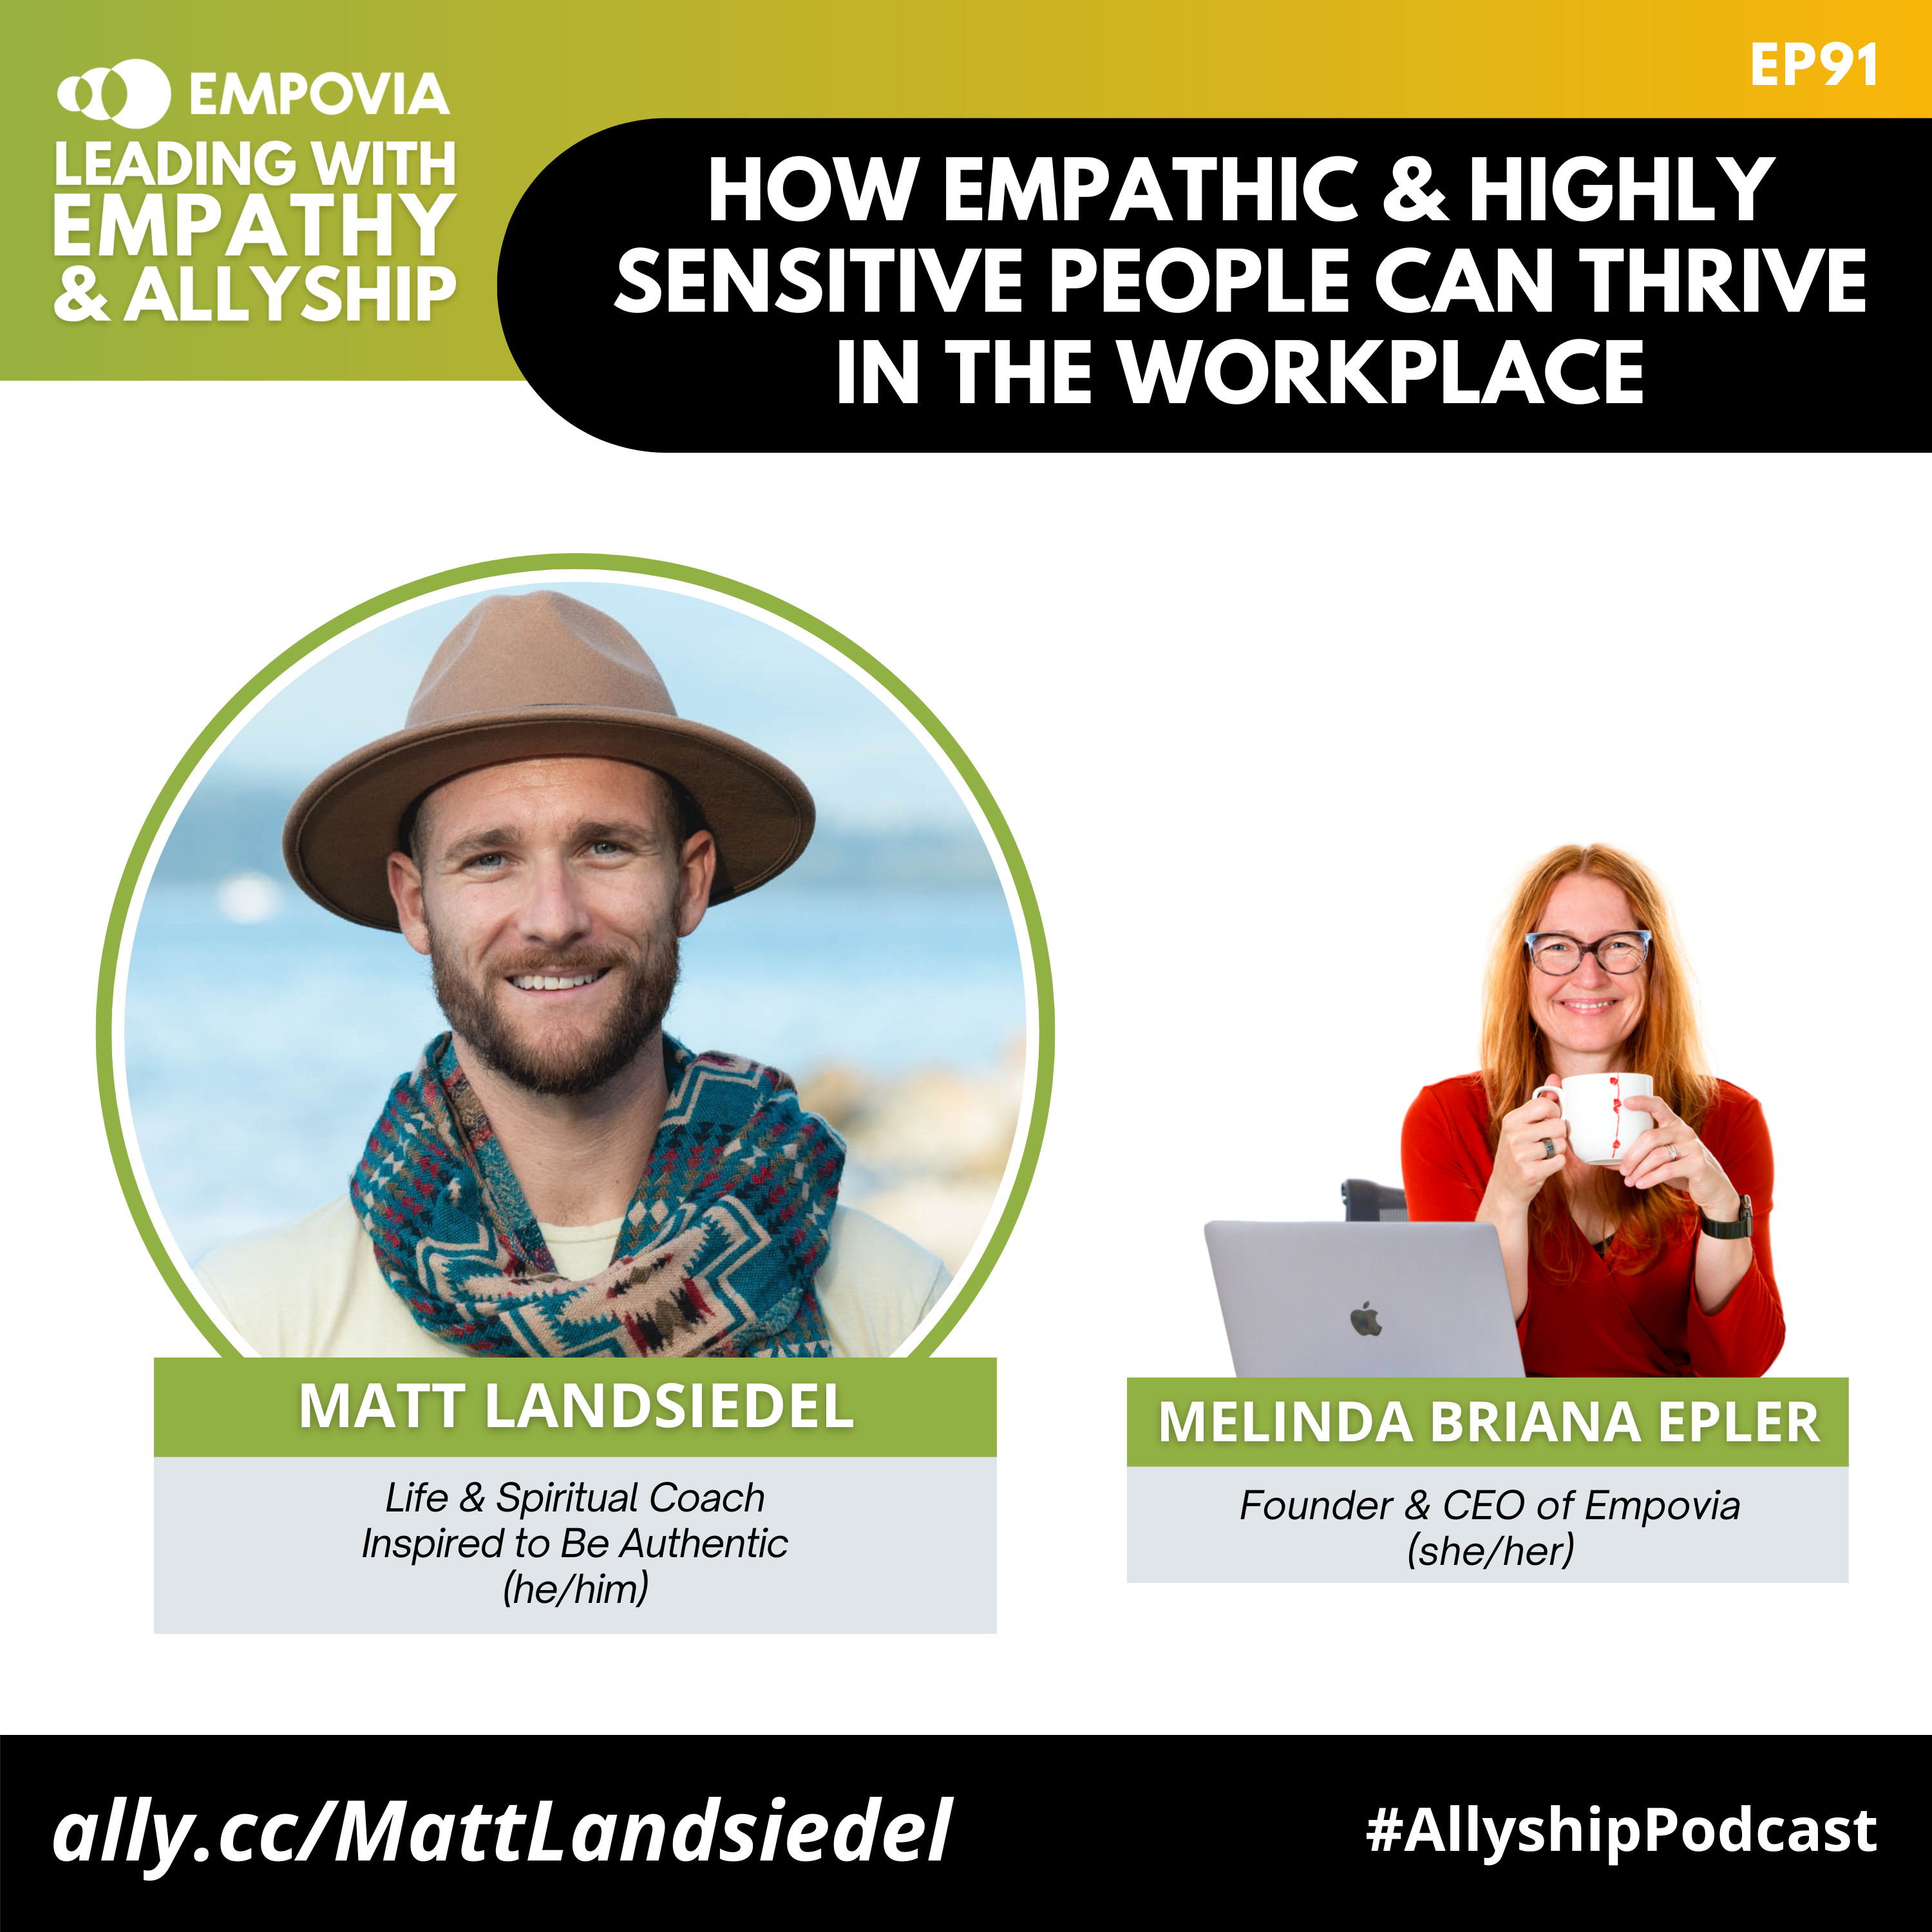 Leading With Empathy & Allyship promo and photos of Matt Landsiedel, a Caucasian man with brown facial hair, a cream shirt, tan hat, and teal geometric-patterned scarf; and host Melinda Briana Epler, a White woman with red hair, glasses, and orange shirt holding a white mug behind a laptop.